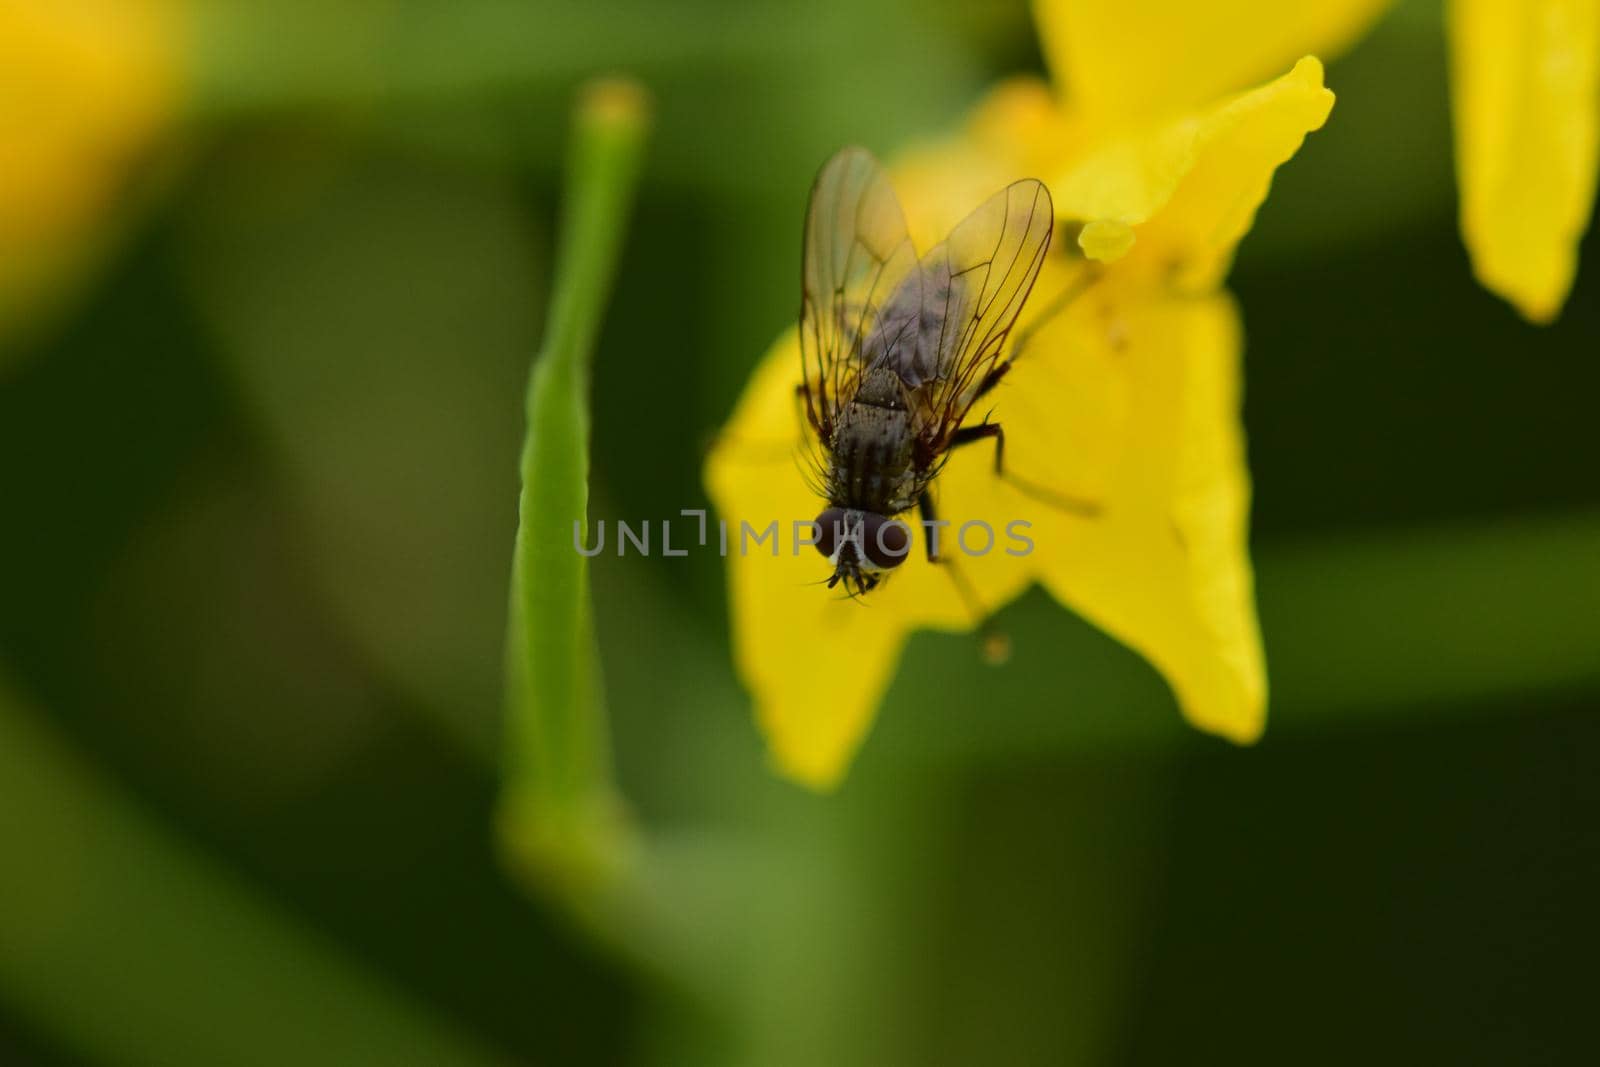 Black fly on a yellow rapeseed flower against a green background as a close up by Luise123